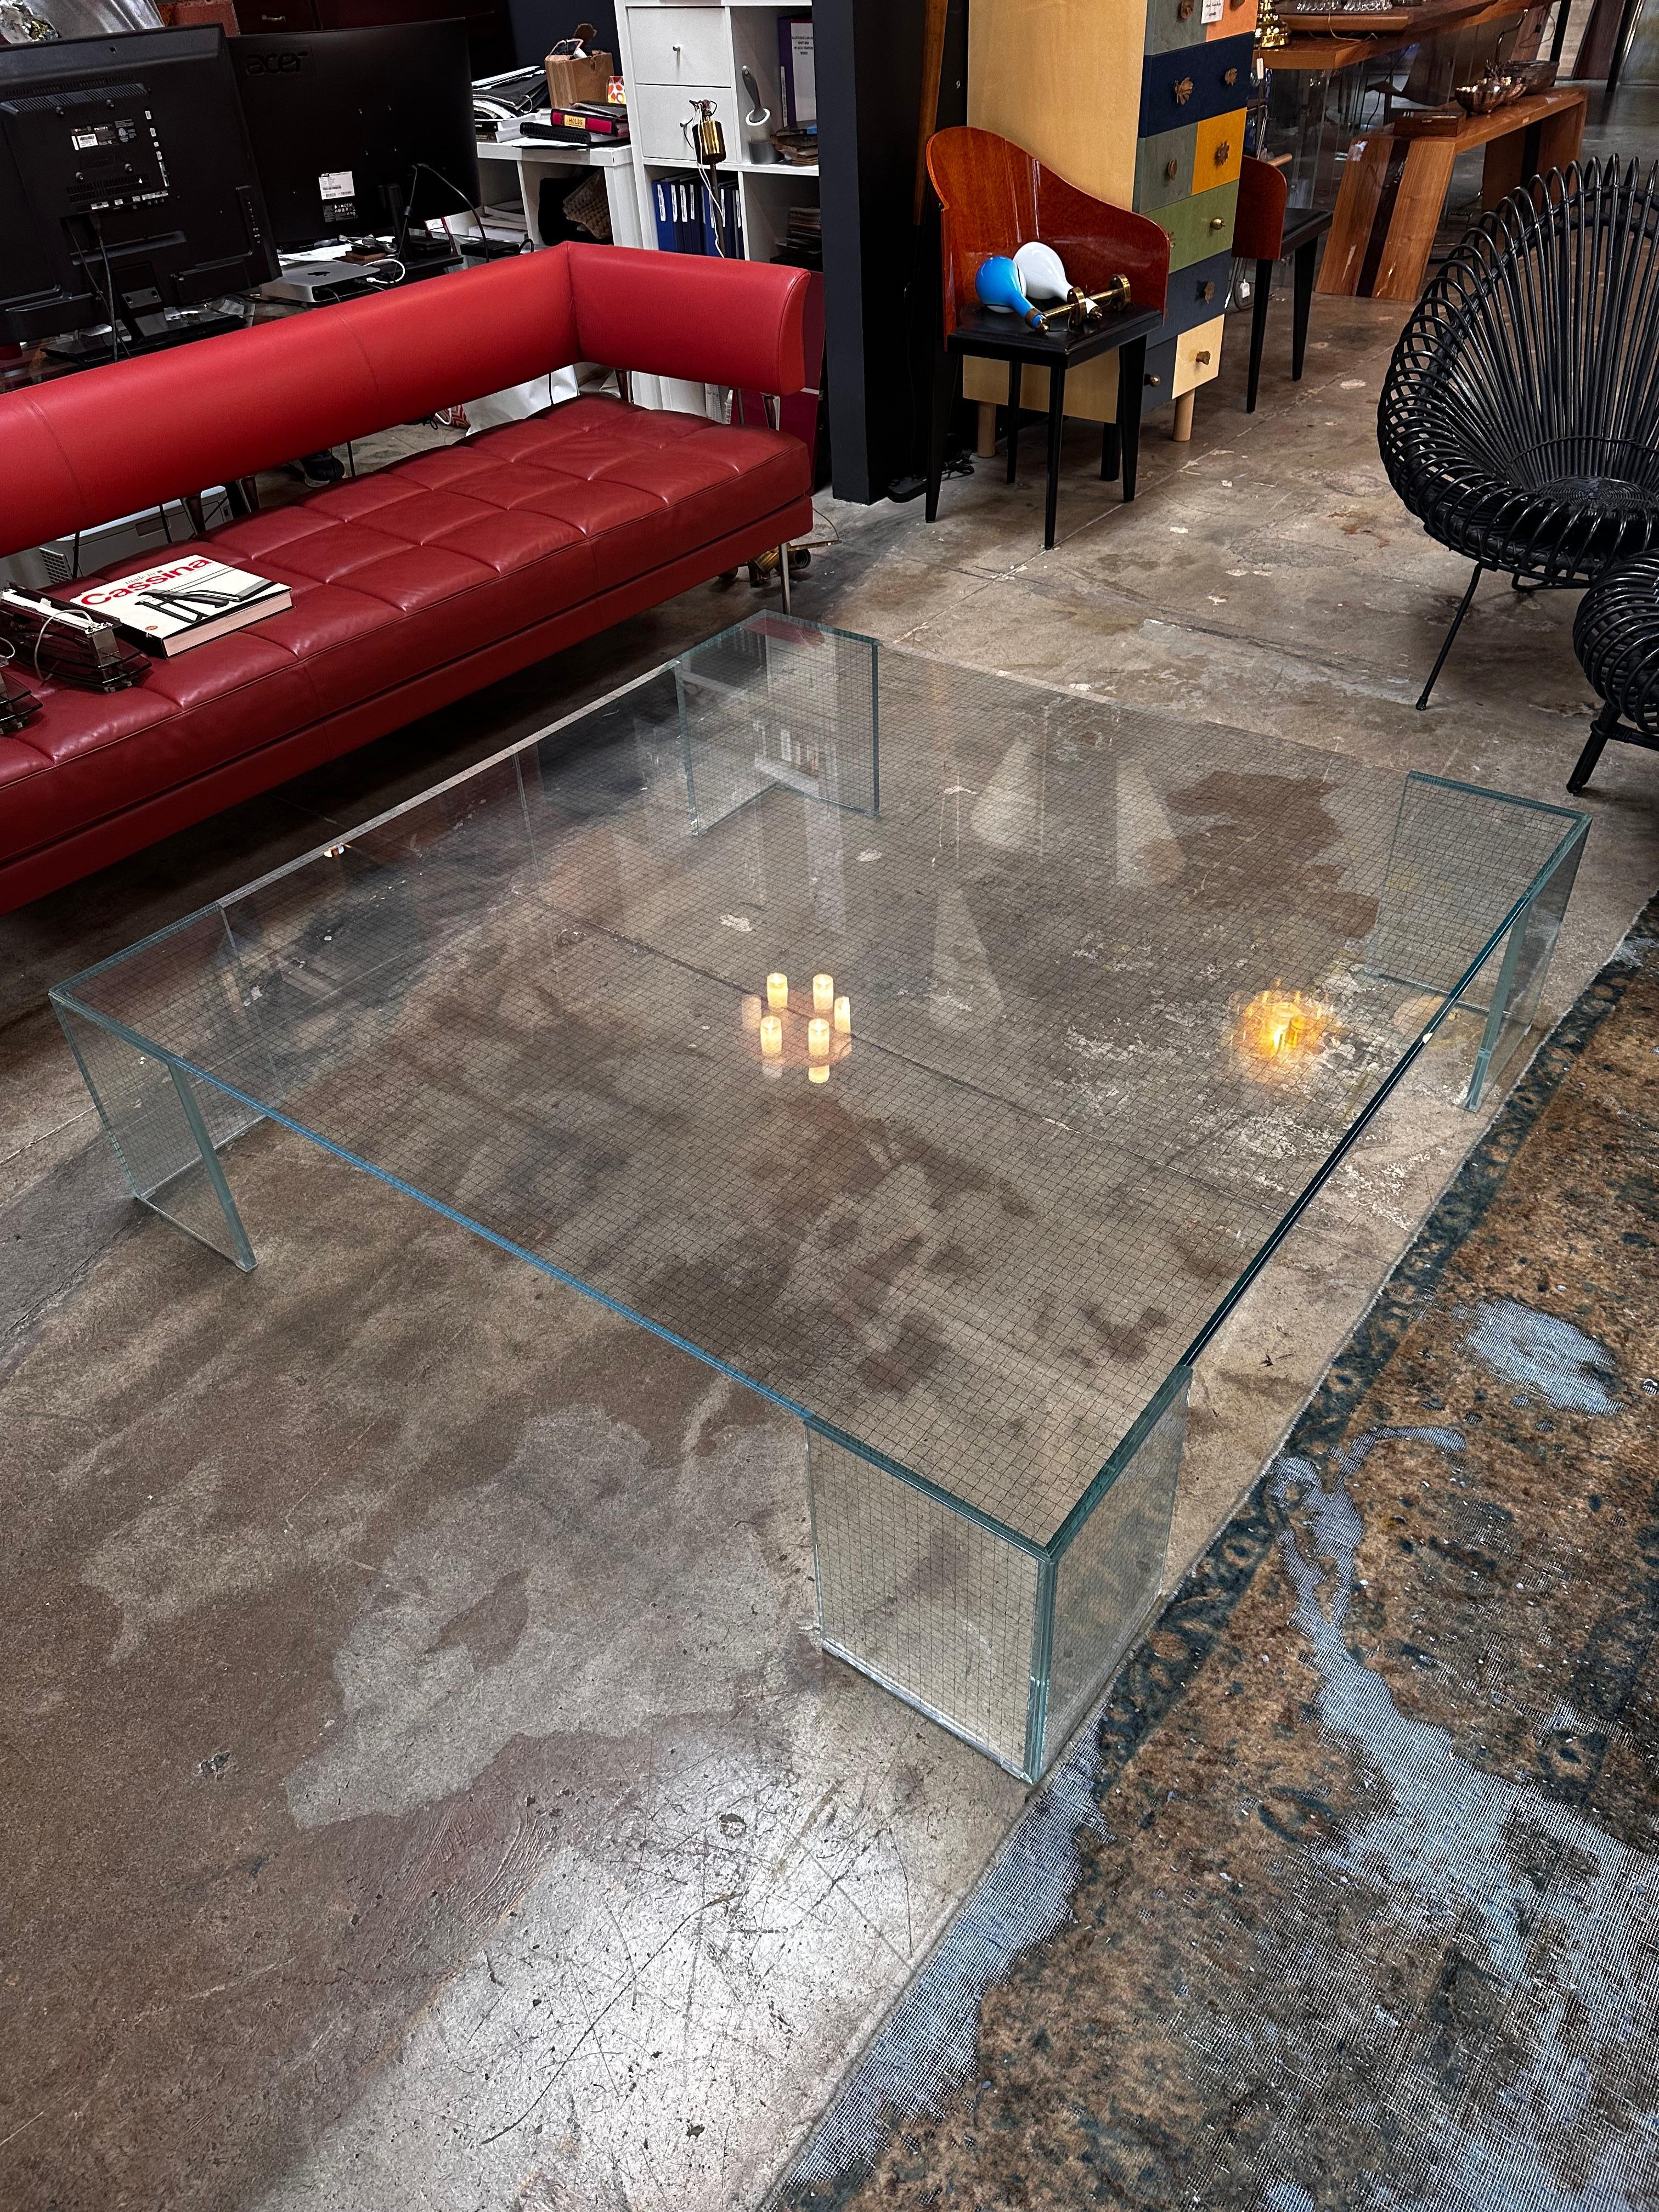 he Vintage Italian Oversize Full Glass Coffee Table by Glas Italia is a striking blend of functionality and artistry. Crafted with finesse, the table features a seamless expanse of glass that creates an illusion of space and light in any room. Its